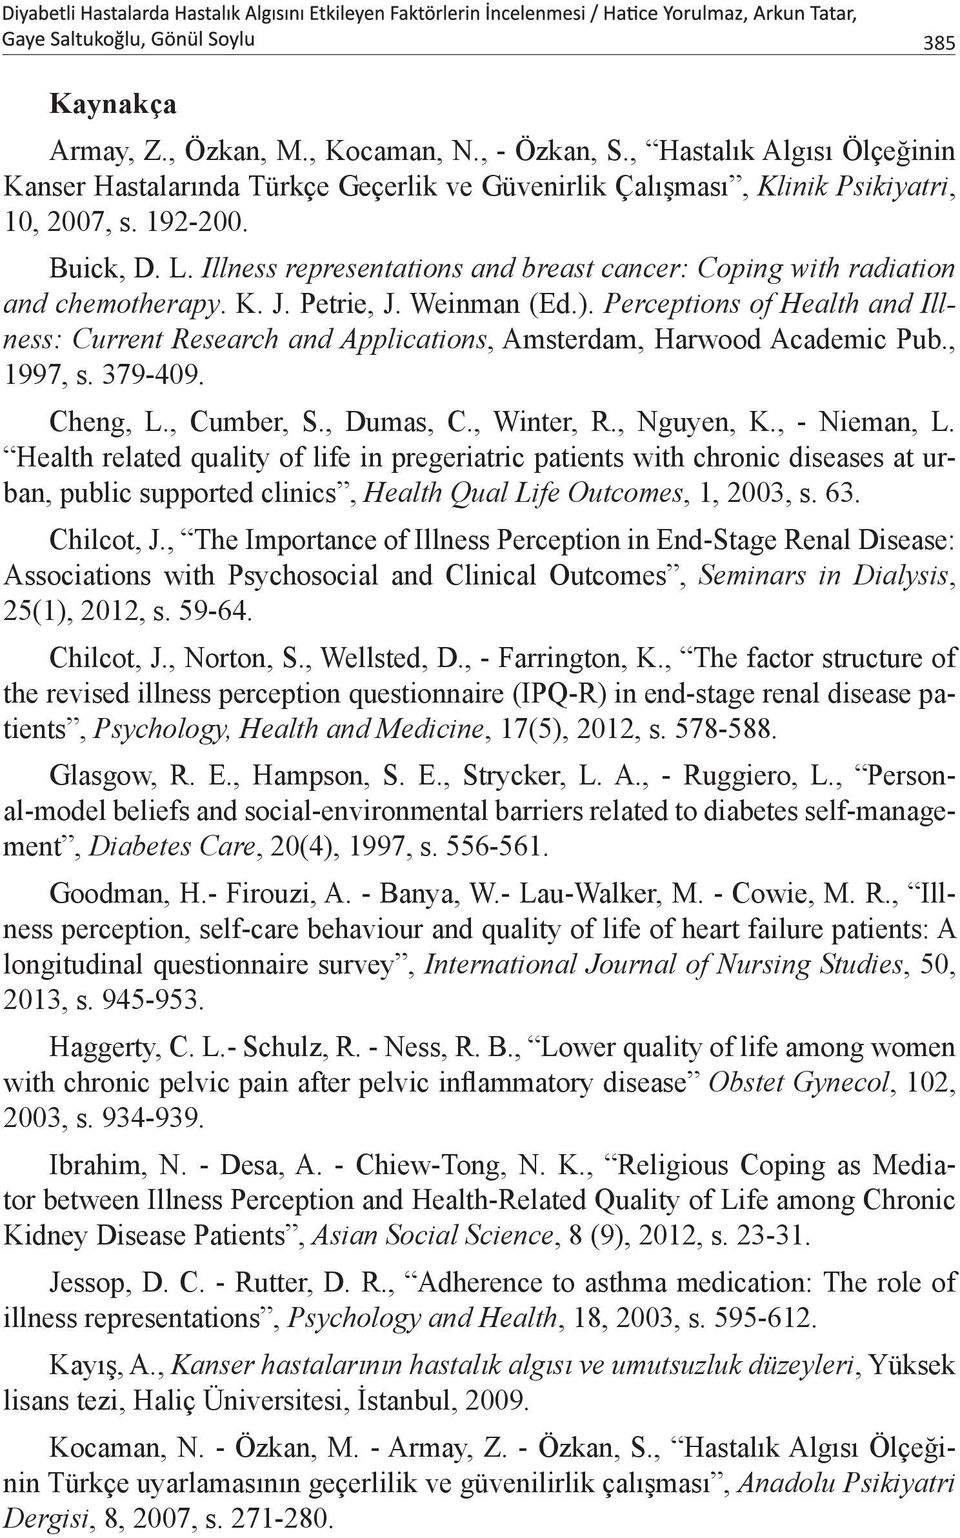 Perceptions of Health and Illness: Current Research and Applications, Amsterdam, Harwood Academic Pub., 1997, s. 379-409. Cheng, L., Cumber, S., Dumas, C., Winter, R., Nguyen, K., - Nieman, L.